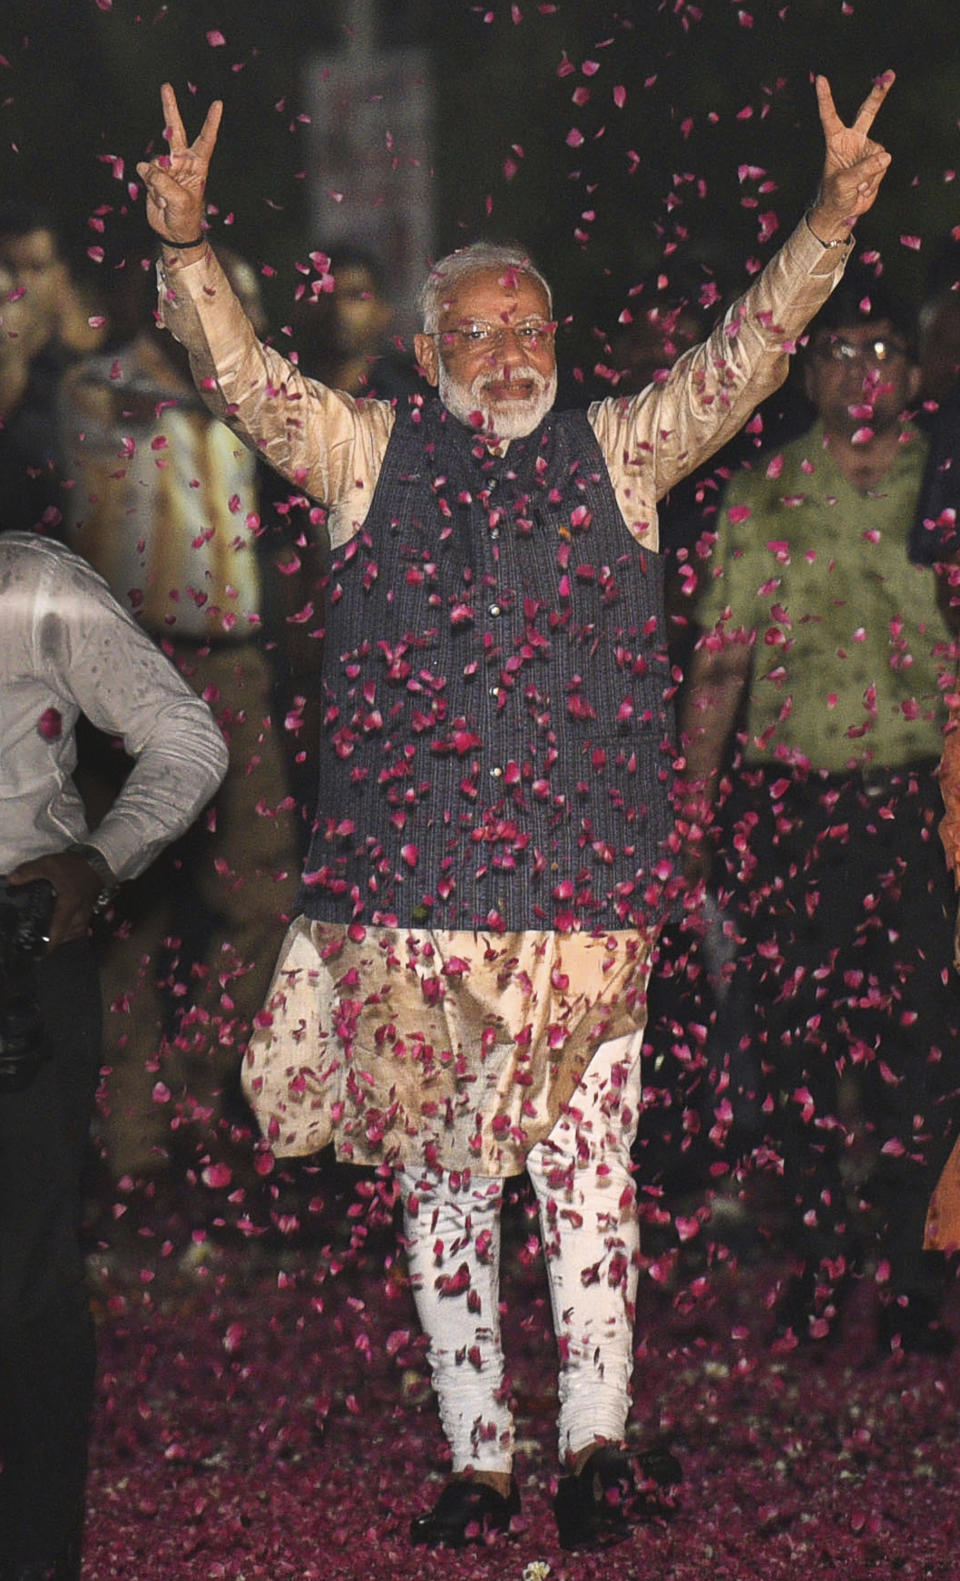 FILE- In this May 23, 2019 file photo, Indian Prime Minister Narendra Modi displays the victory symbol upon arrival at the party headquarters following his comeback in the general elections in New Delhi, India. Modi, who first became prime minister in 2014, has reinforced his power with nearly every election since then. In national voting earlier this year, the BJP took 303 of the 542 seats in the lower house of Parliament. (AP Photo, File)